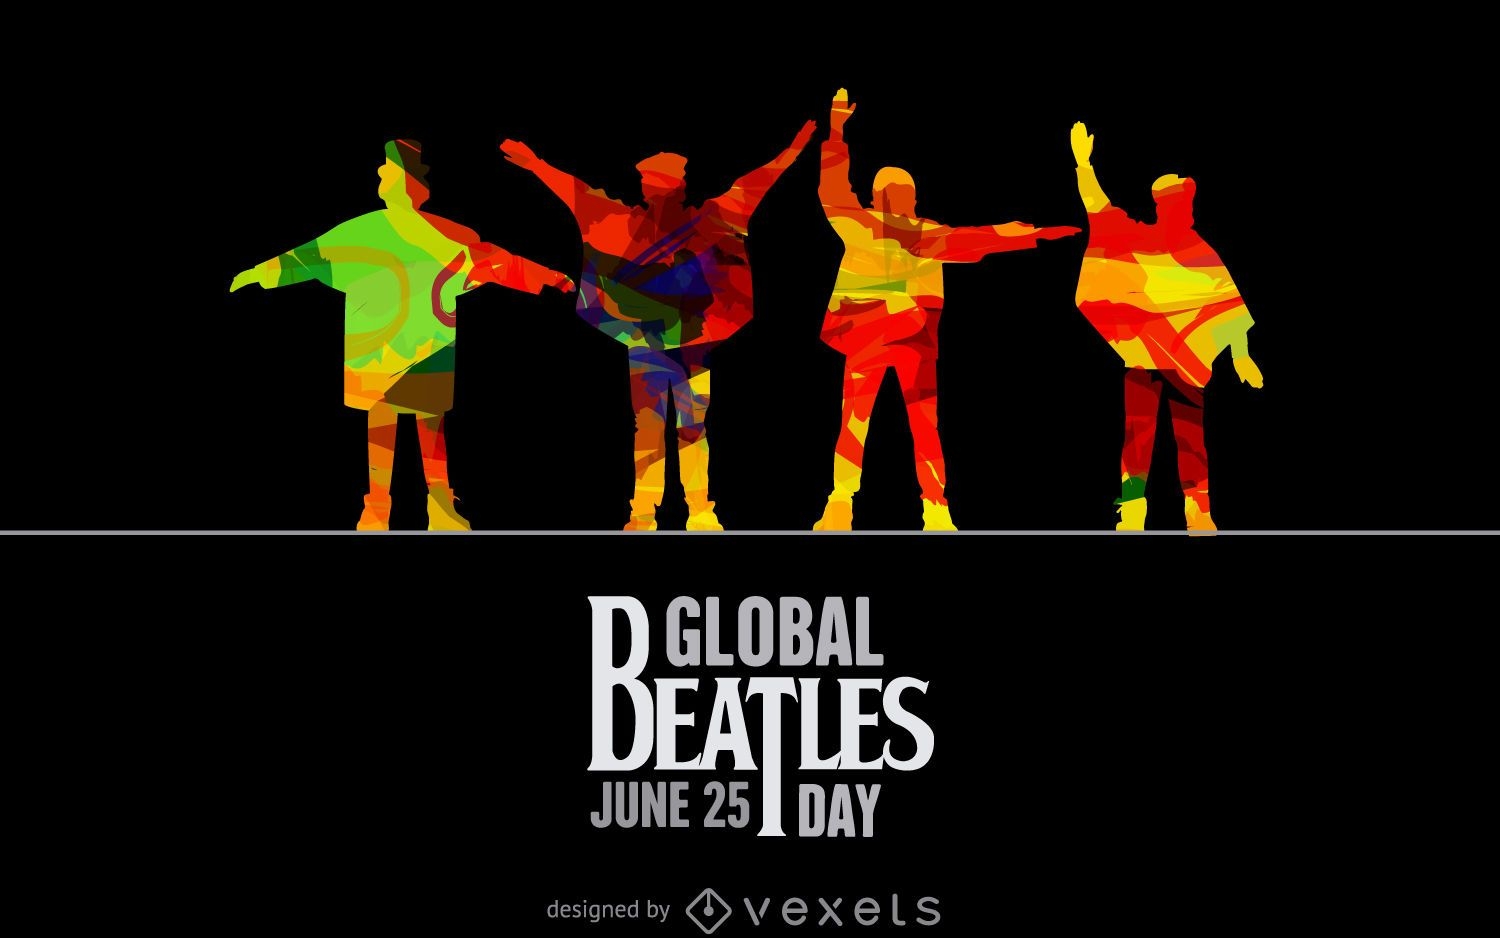 Global Beatles Day help silhouettes